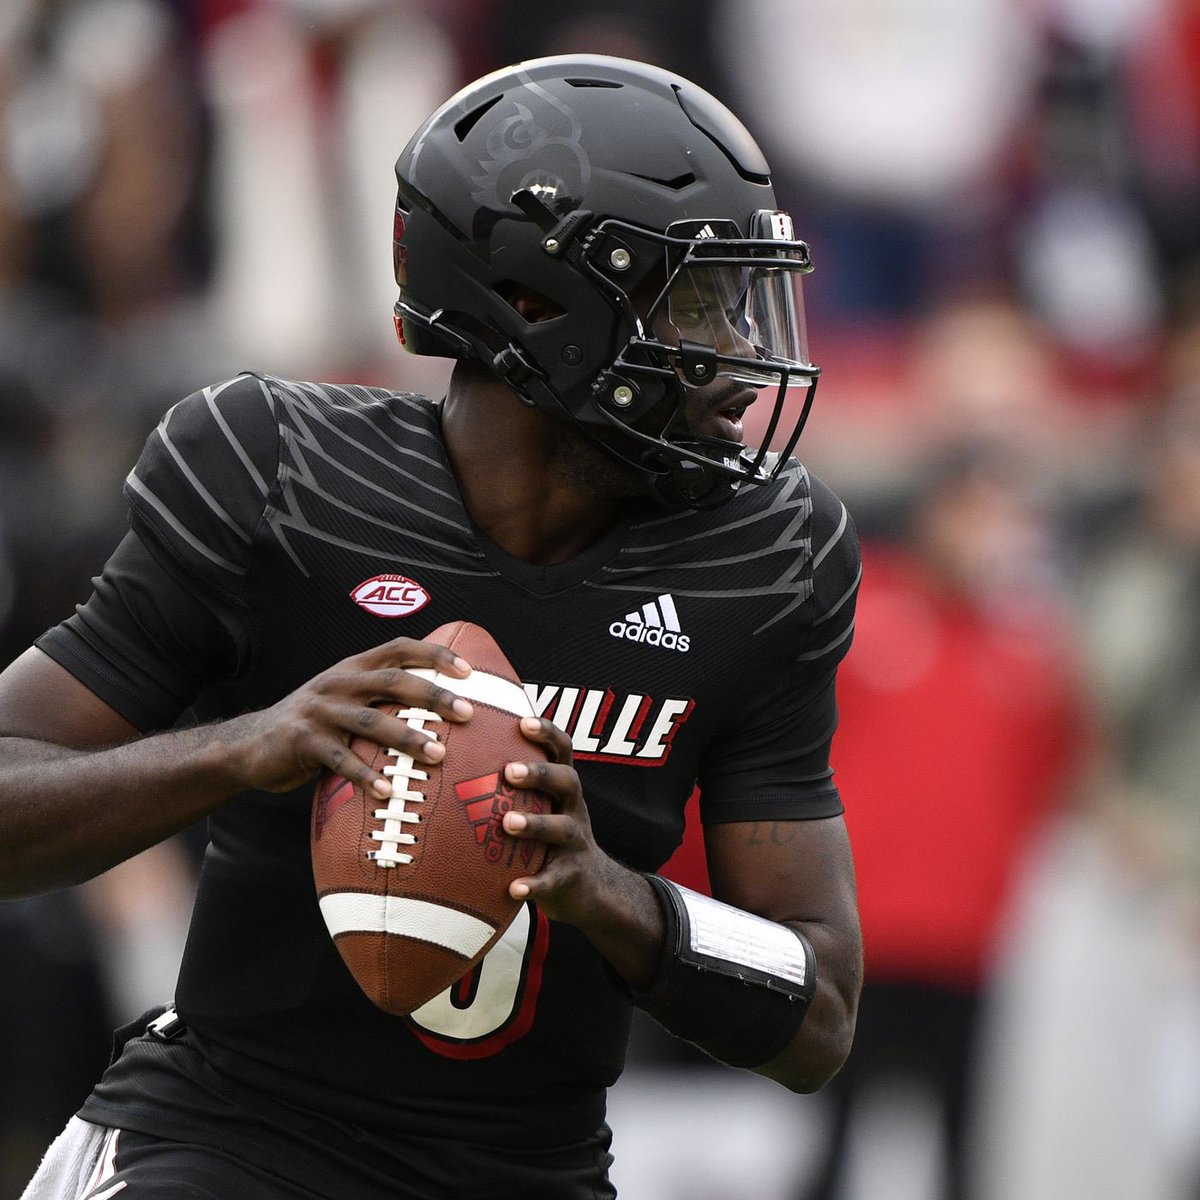 #AGTG I am extremely blessed and honored to have received another POWER 5 OFFER from LOUISVILLE 🐦‍⬛🔴 #GoCards @LouisvilleFB #BTruQBTraining @baylintrujillo @Adamdon3 @tpponton